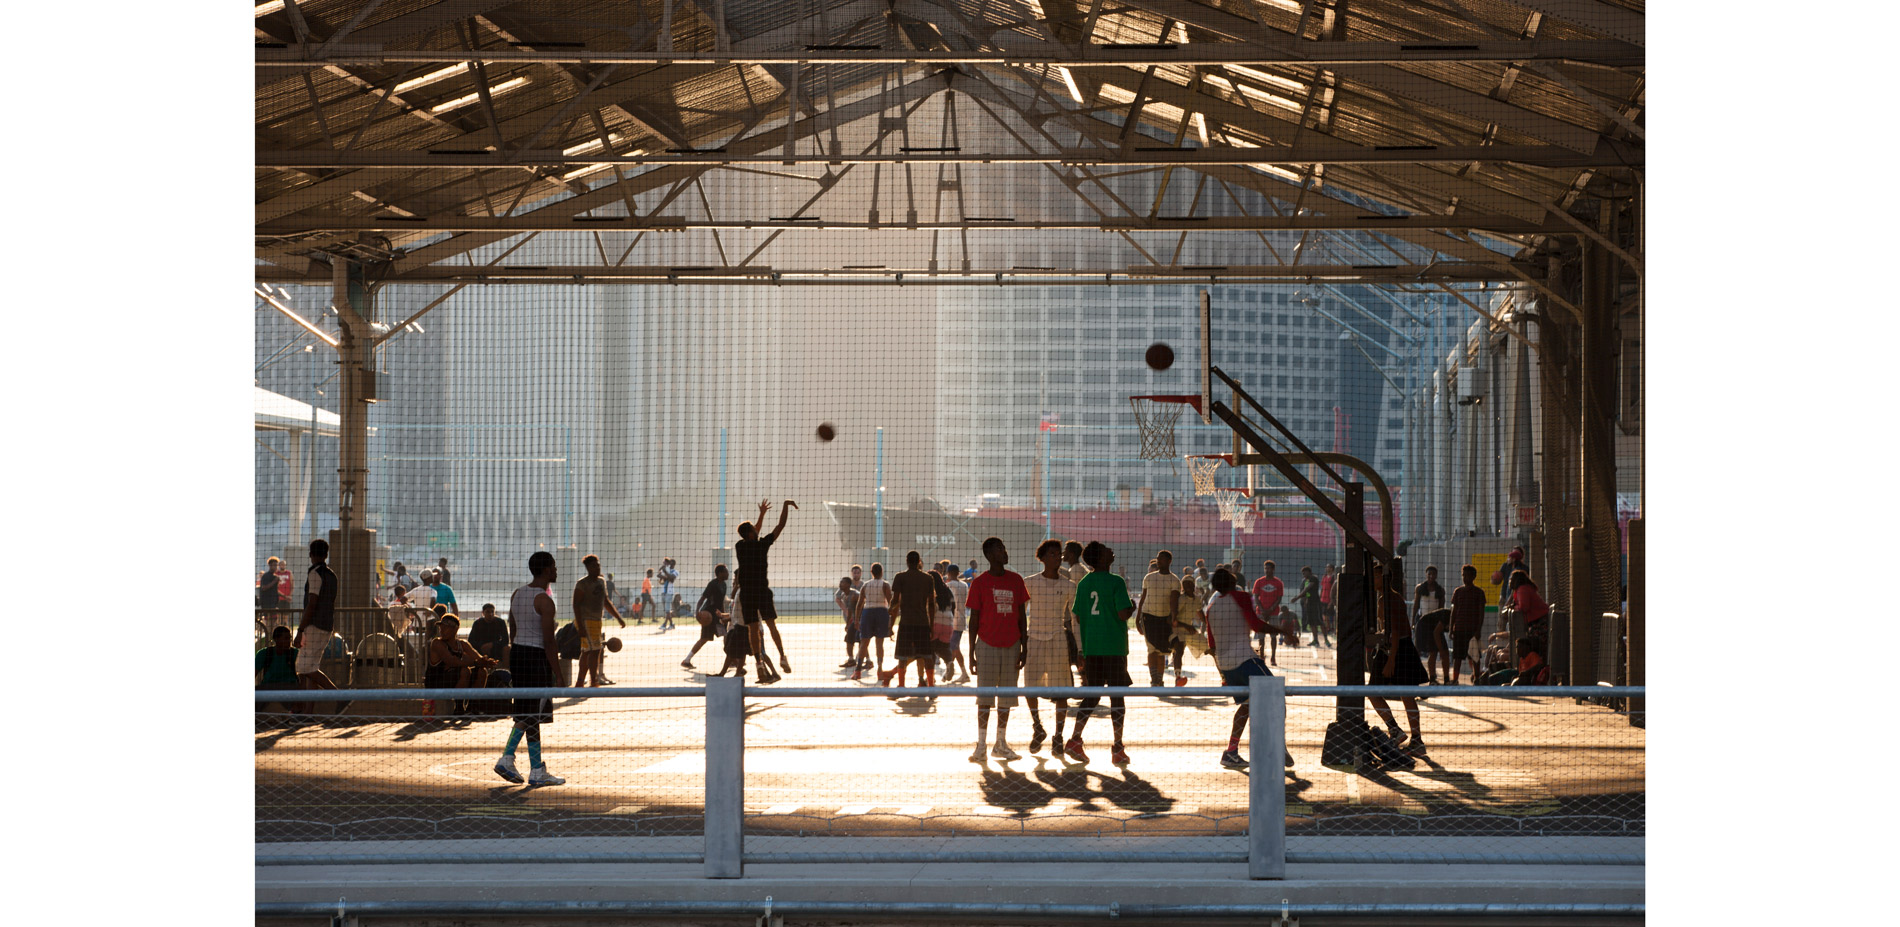 Known to Brooklyn youth as “The Piers,” facilities for basketball, handball, roller skating, and more carved out of the original warehouse structure m…